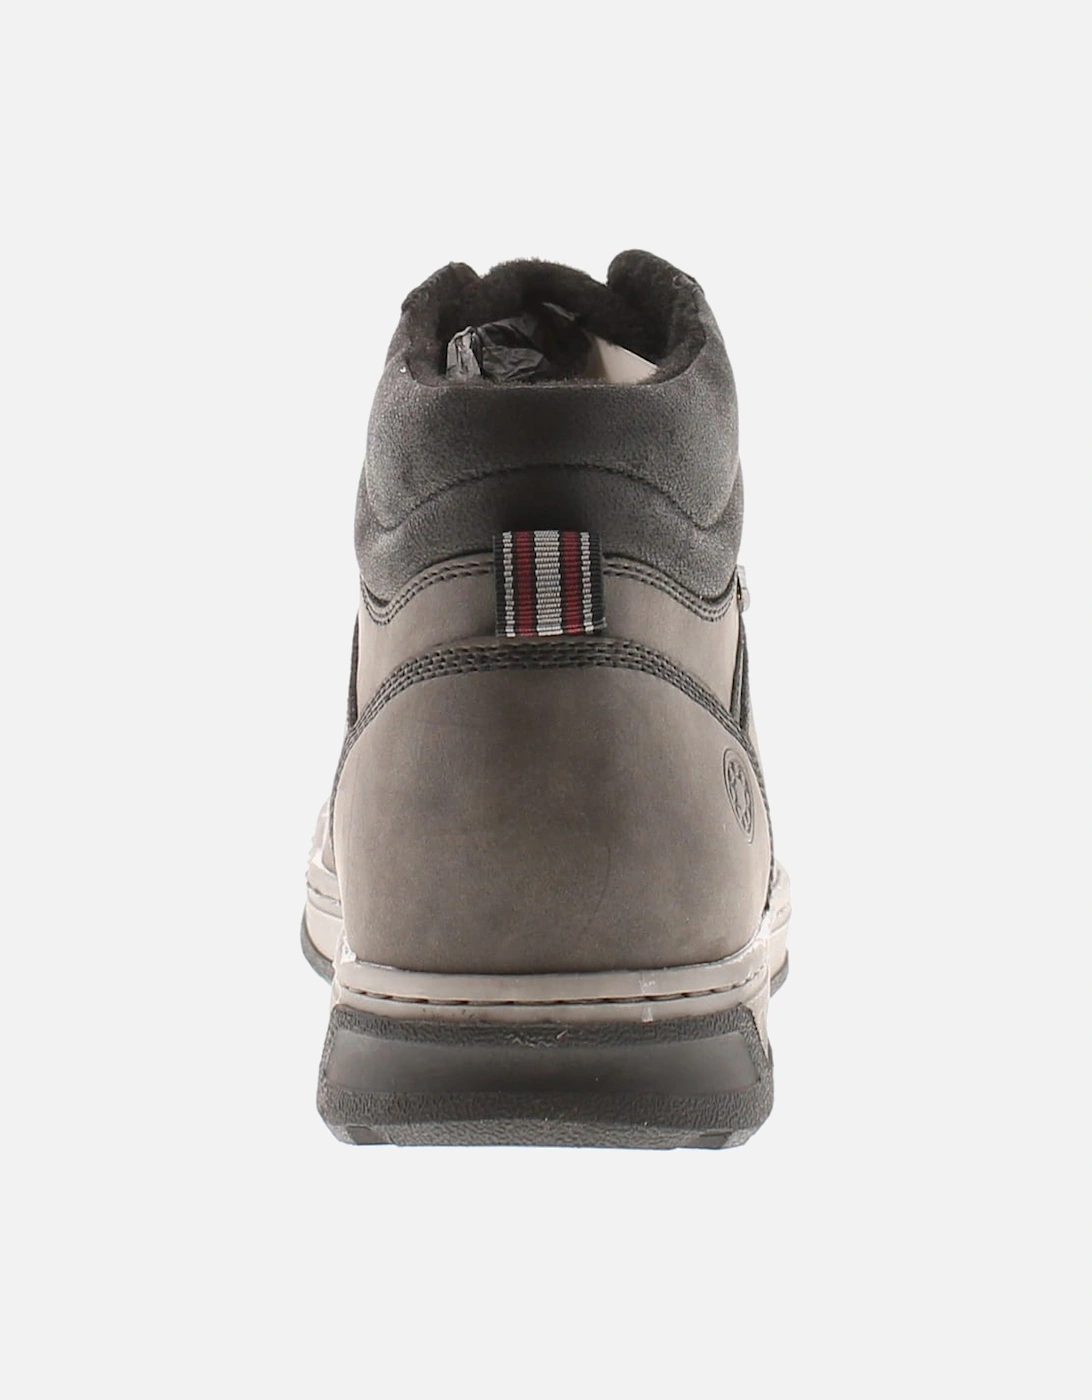 Mens Casual Boots Roger Lace Up grey UK Size